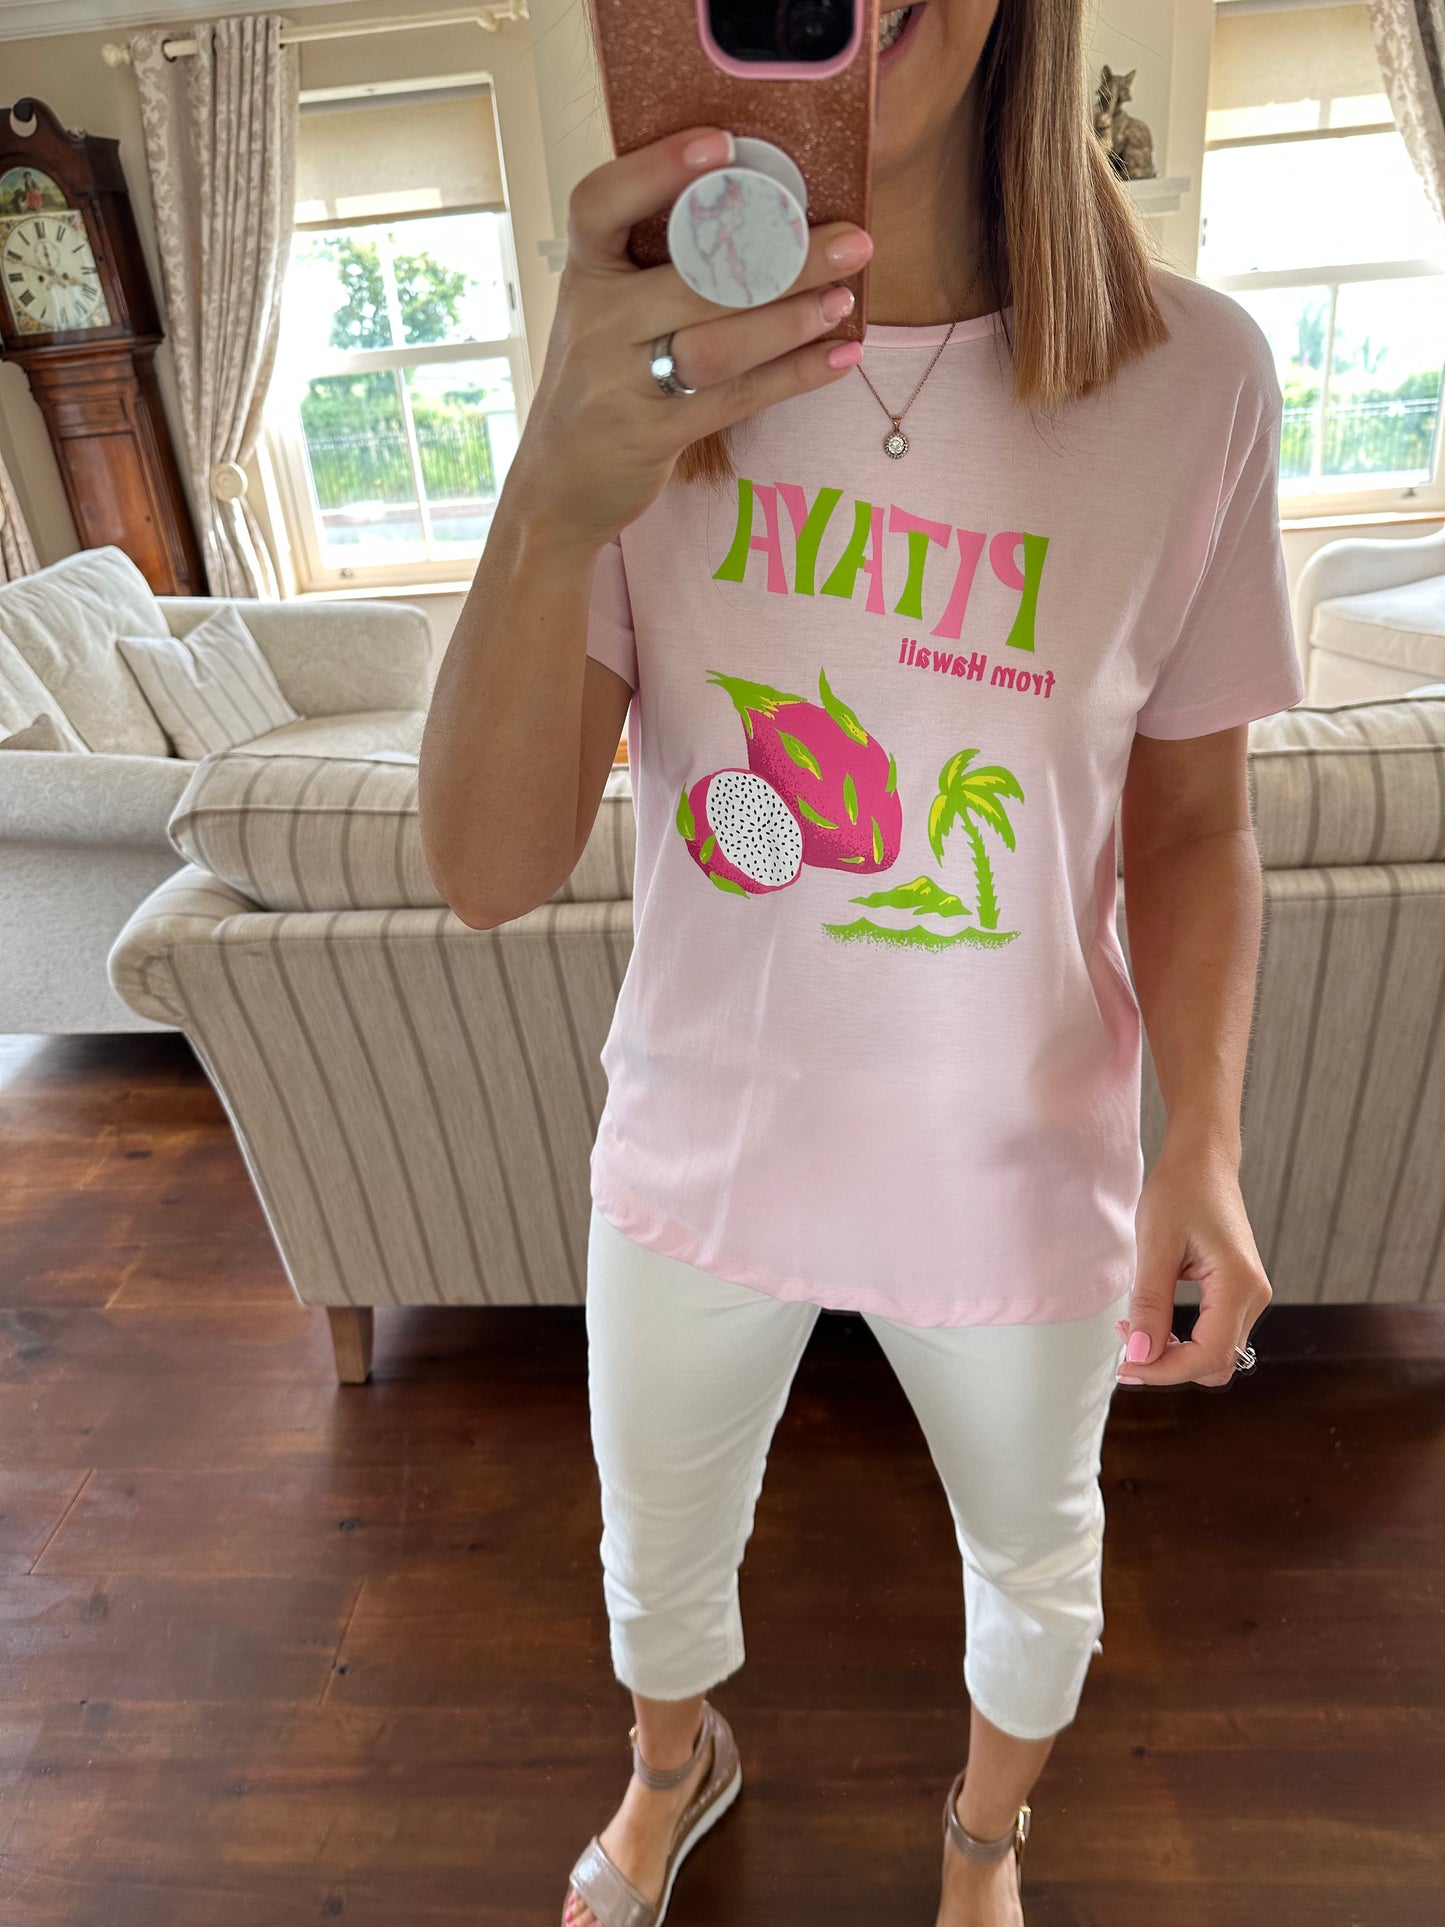 White, lime green and pink t shirt 42065